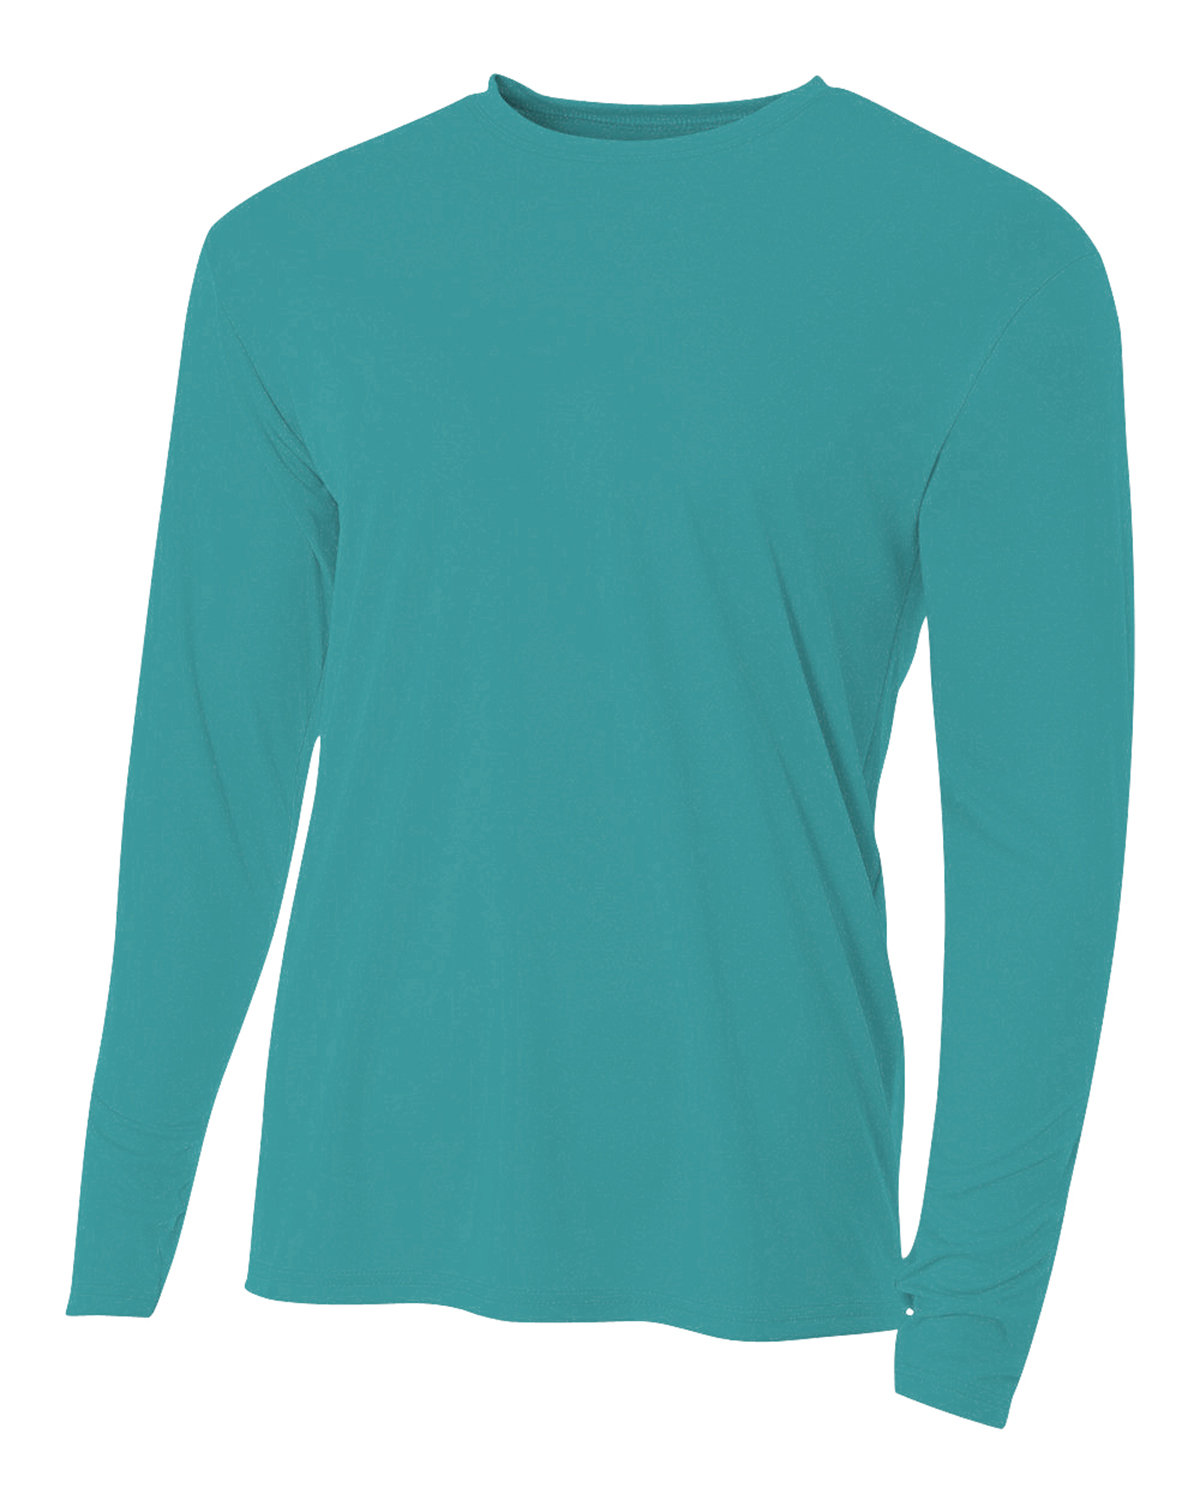 A4 Men's Cooling Performance Long Sleeve T-Shirt TEAL 